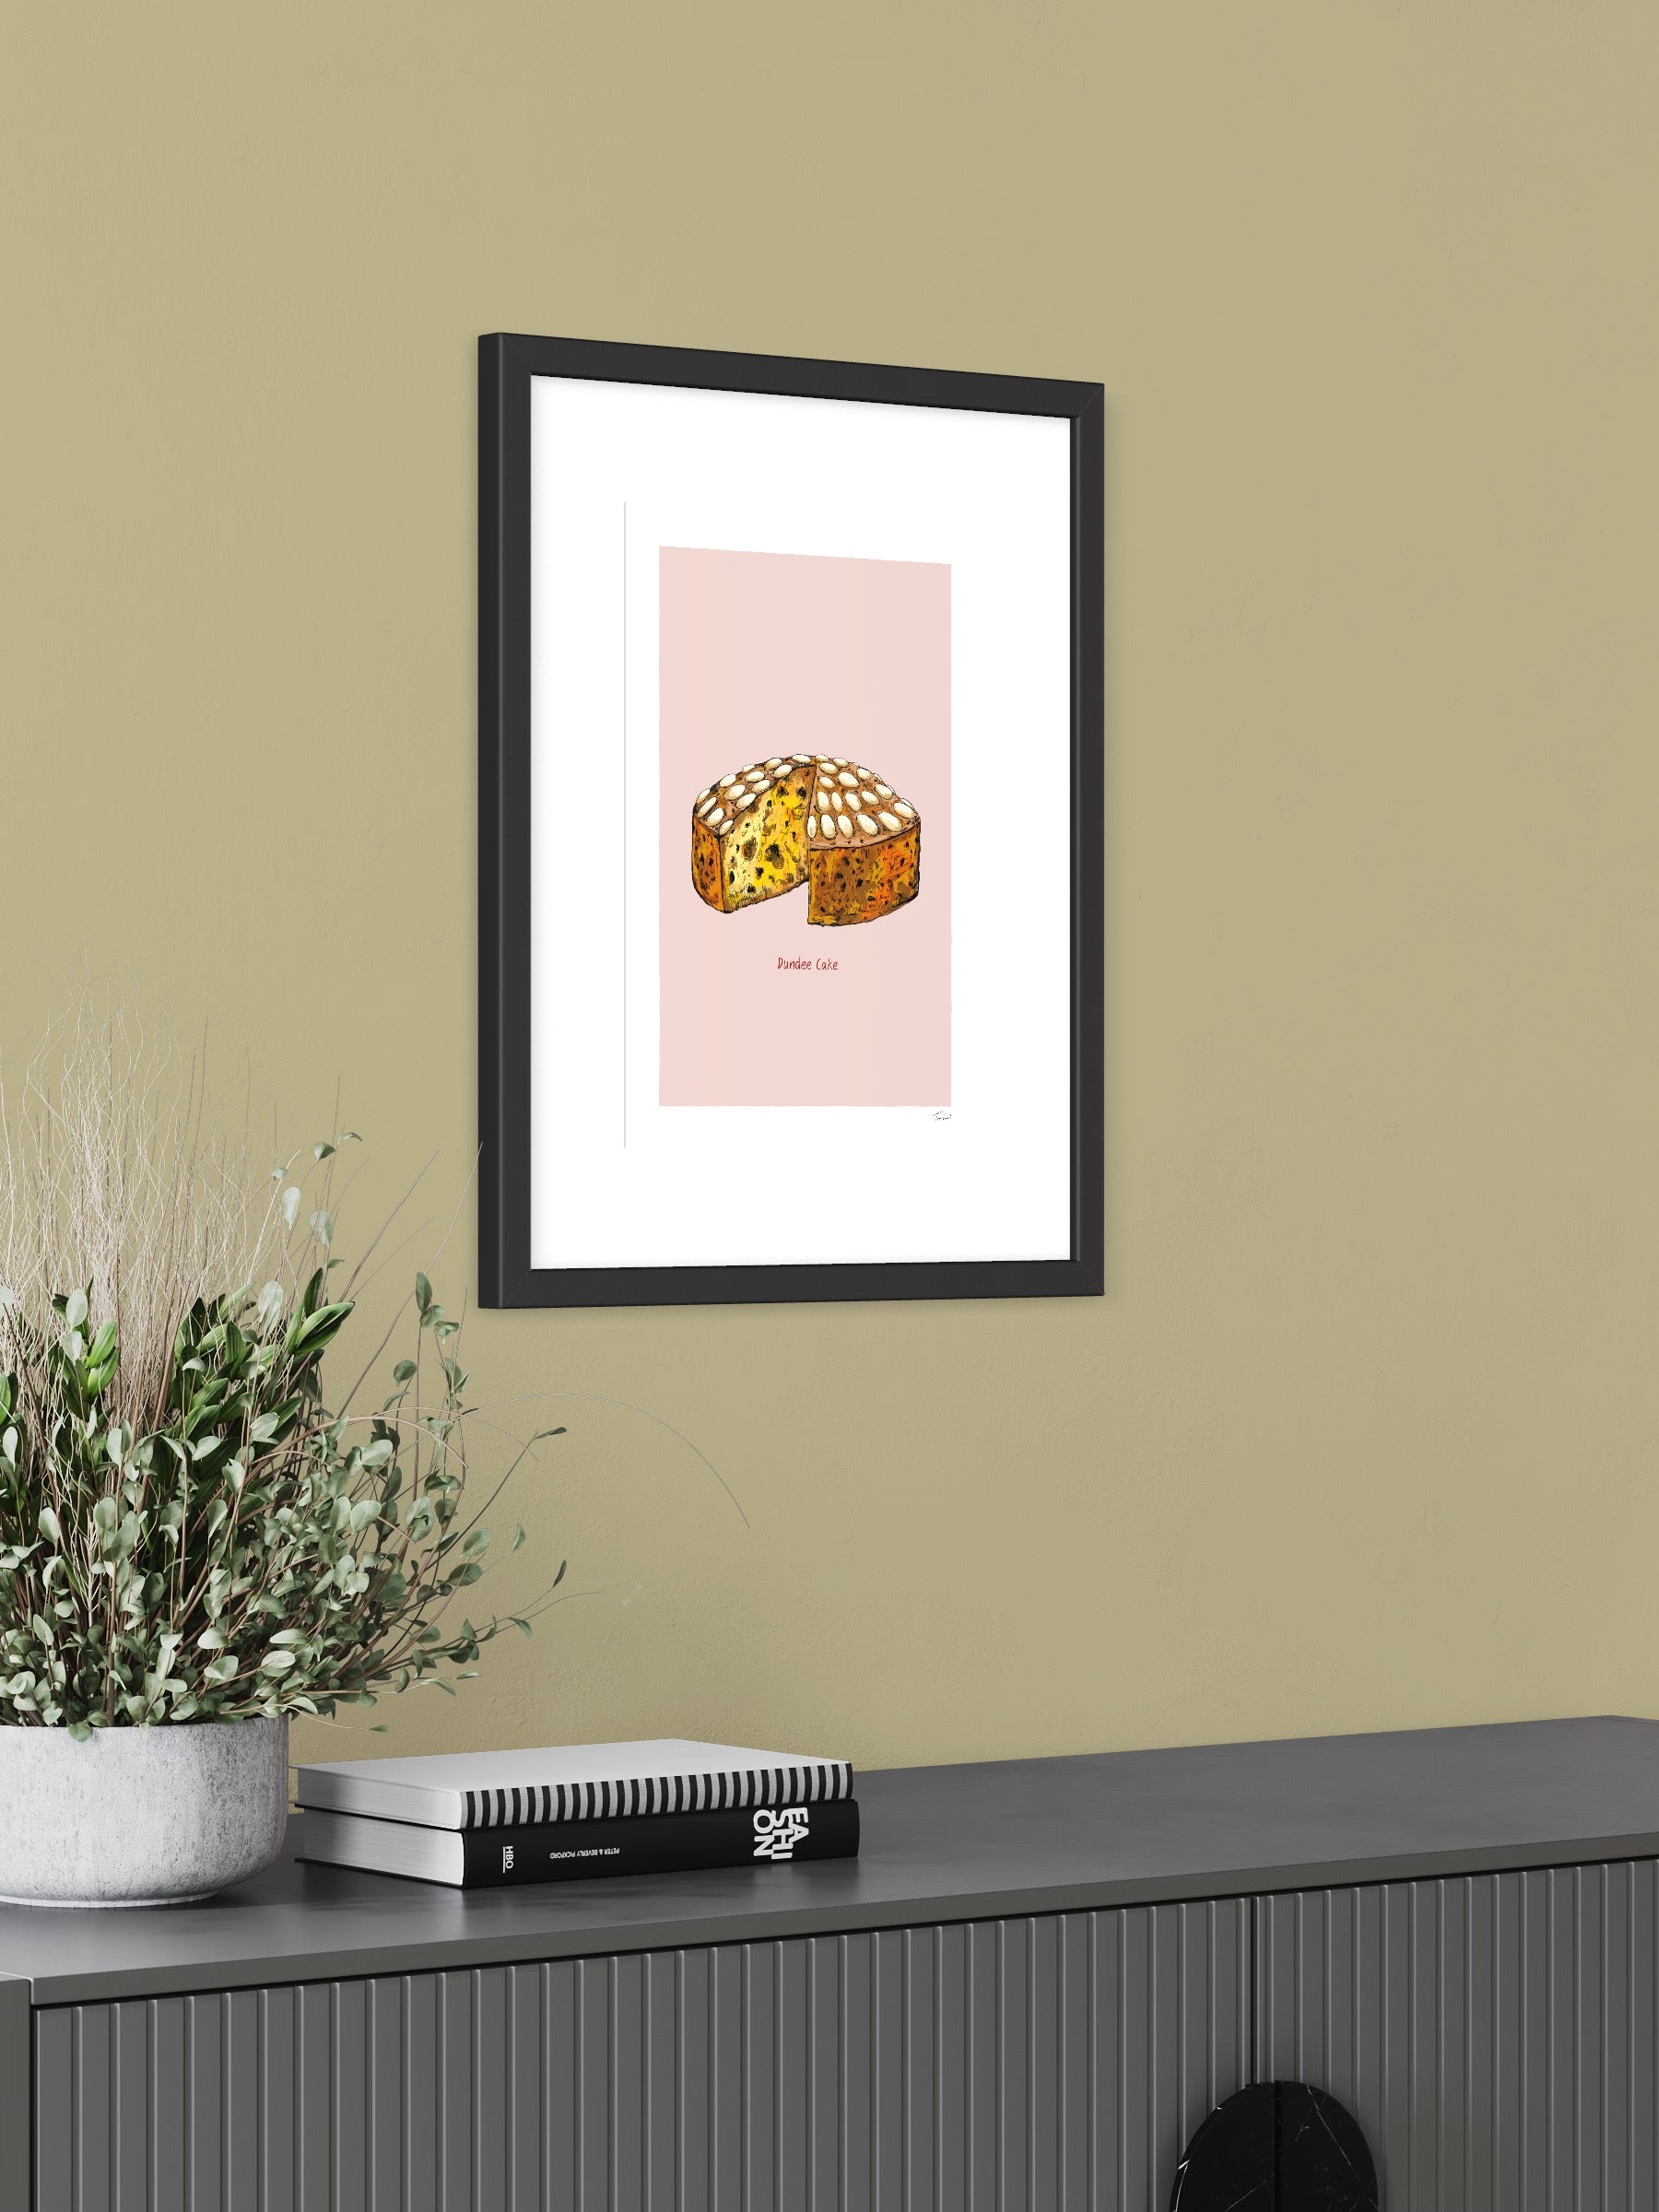 This image shows a giclee wall art print by Tom Laird Illustration of a Dundee Cake, framed in a beautiful living room with tasteful modern home decor. This art print is available from Tom Laird Illustration in various sizes.